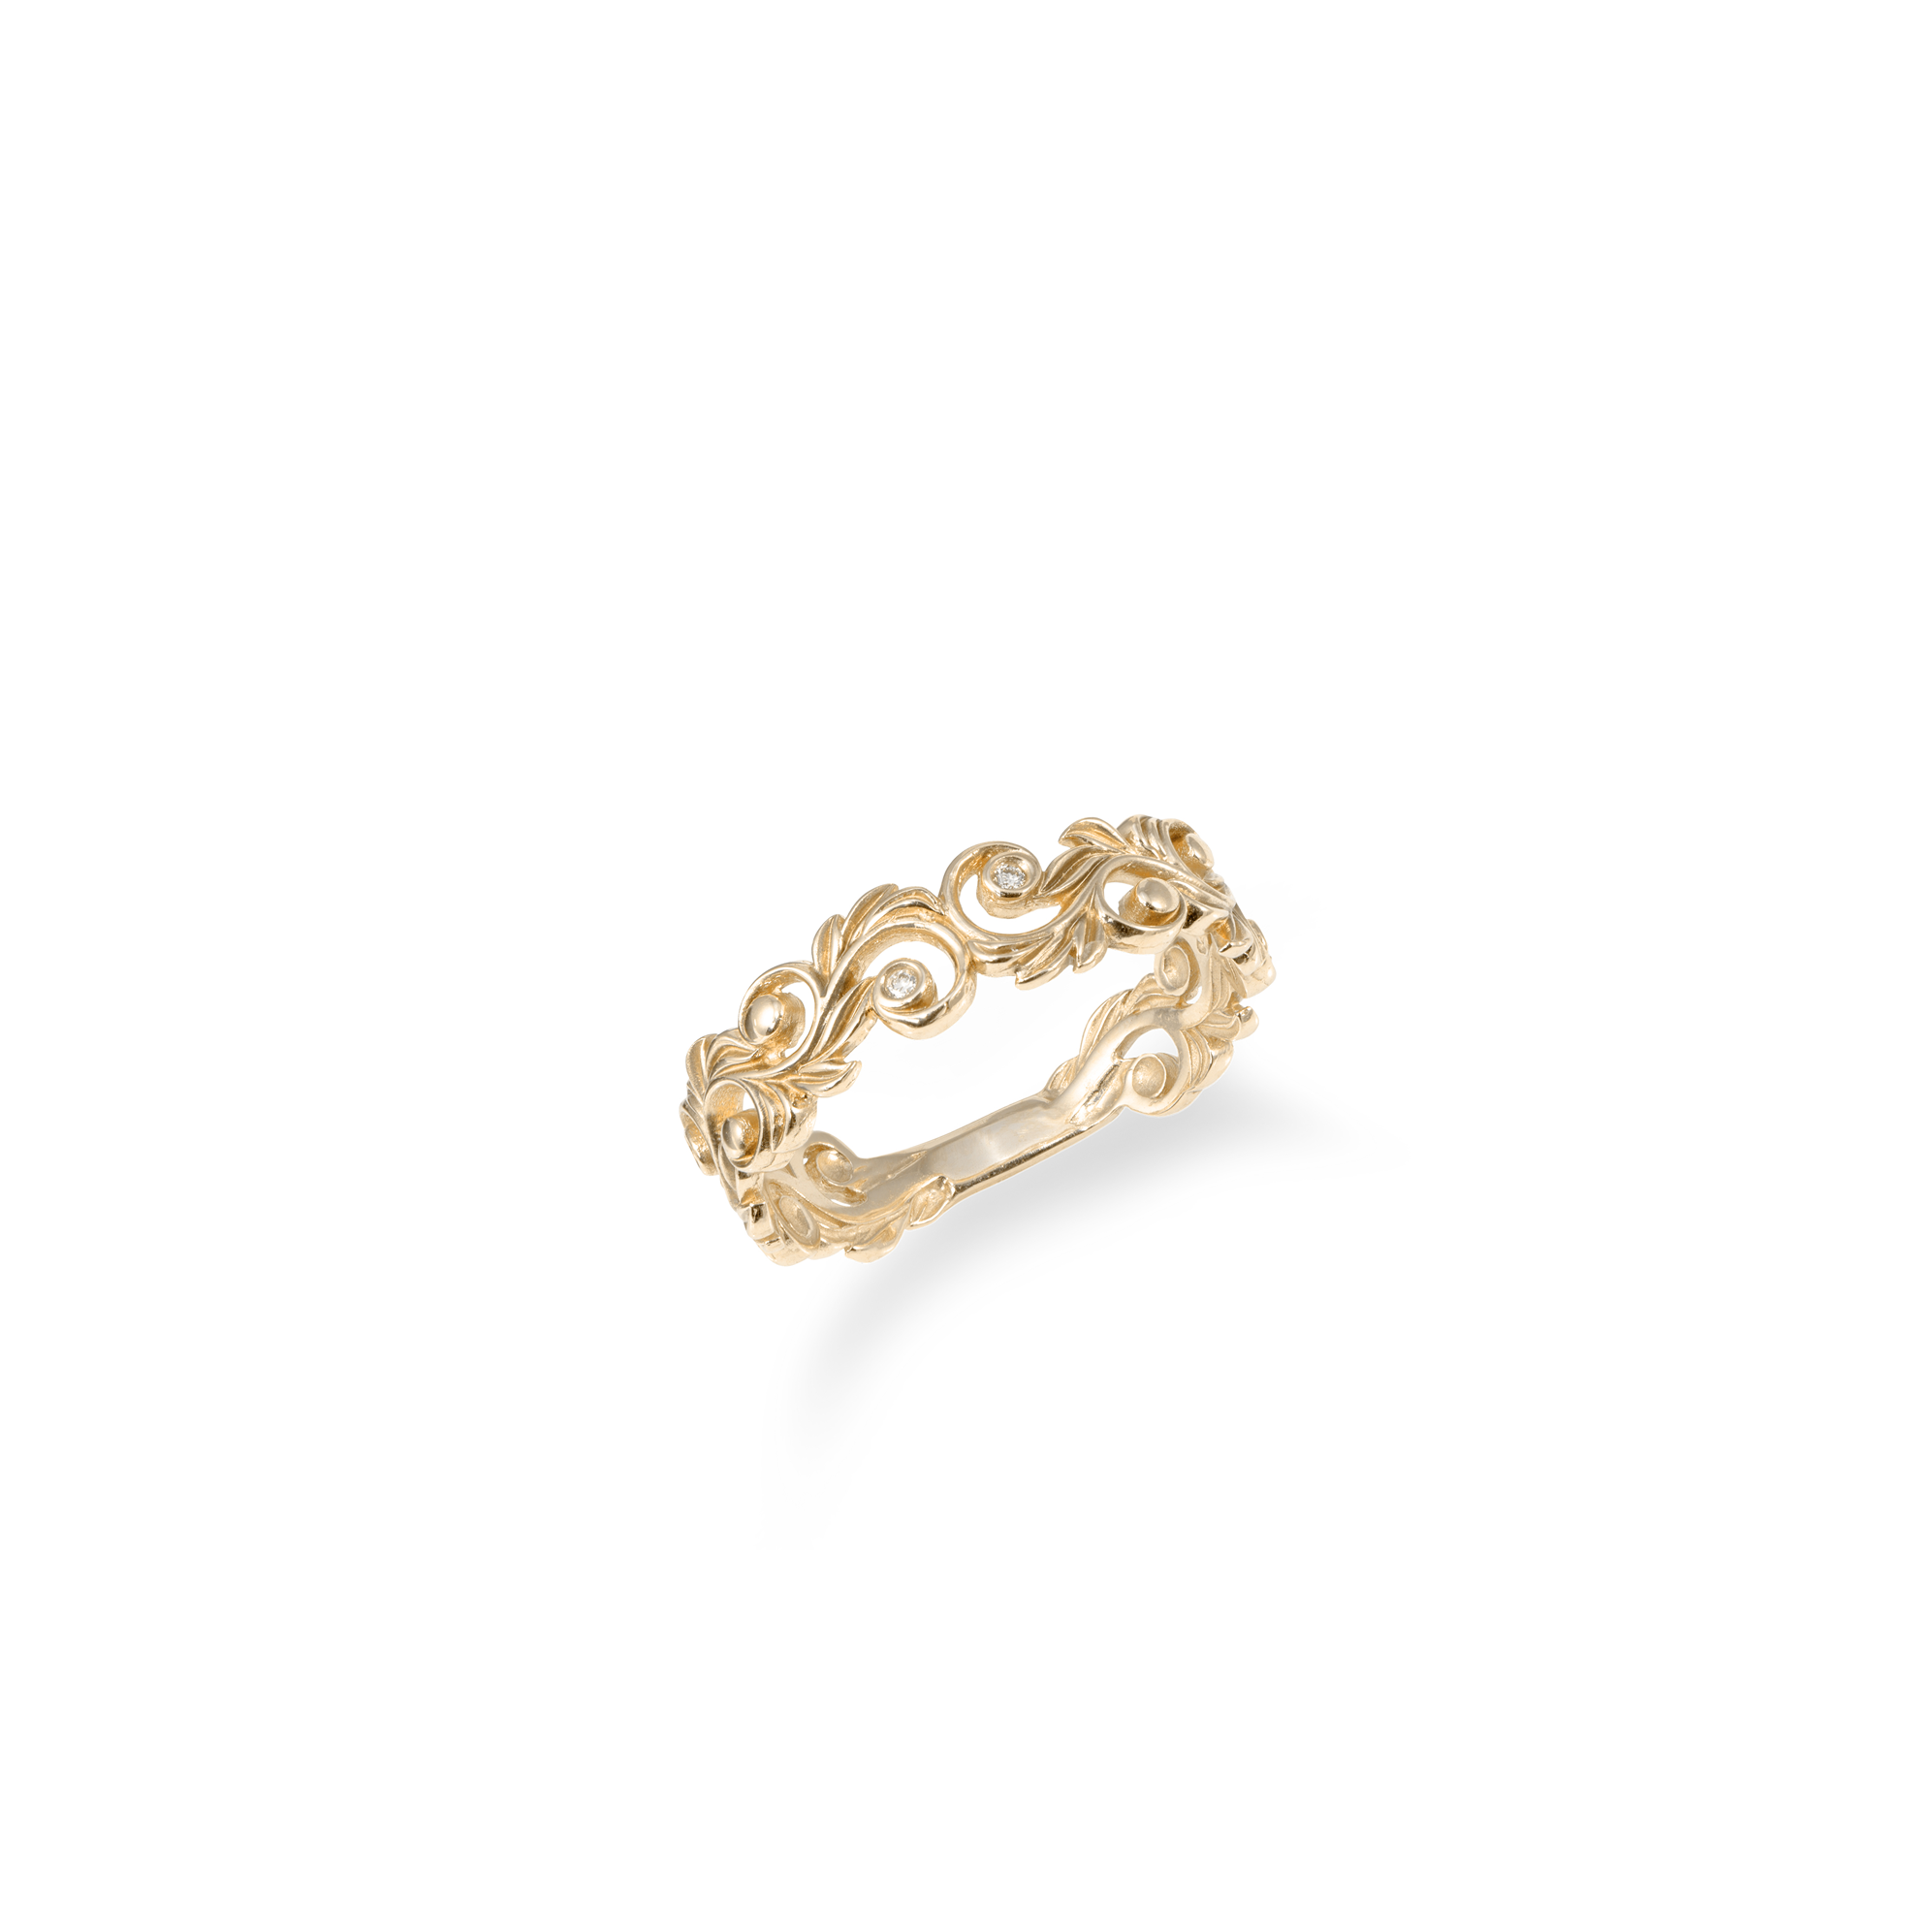 Living Heirloom Ring in Gold with Diamonds - 6mm